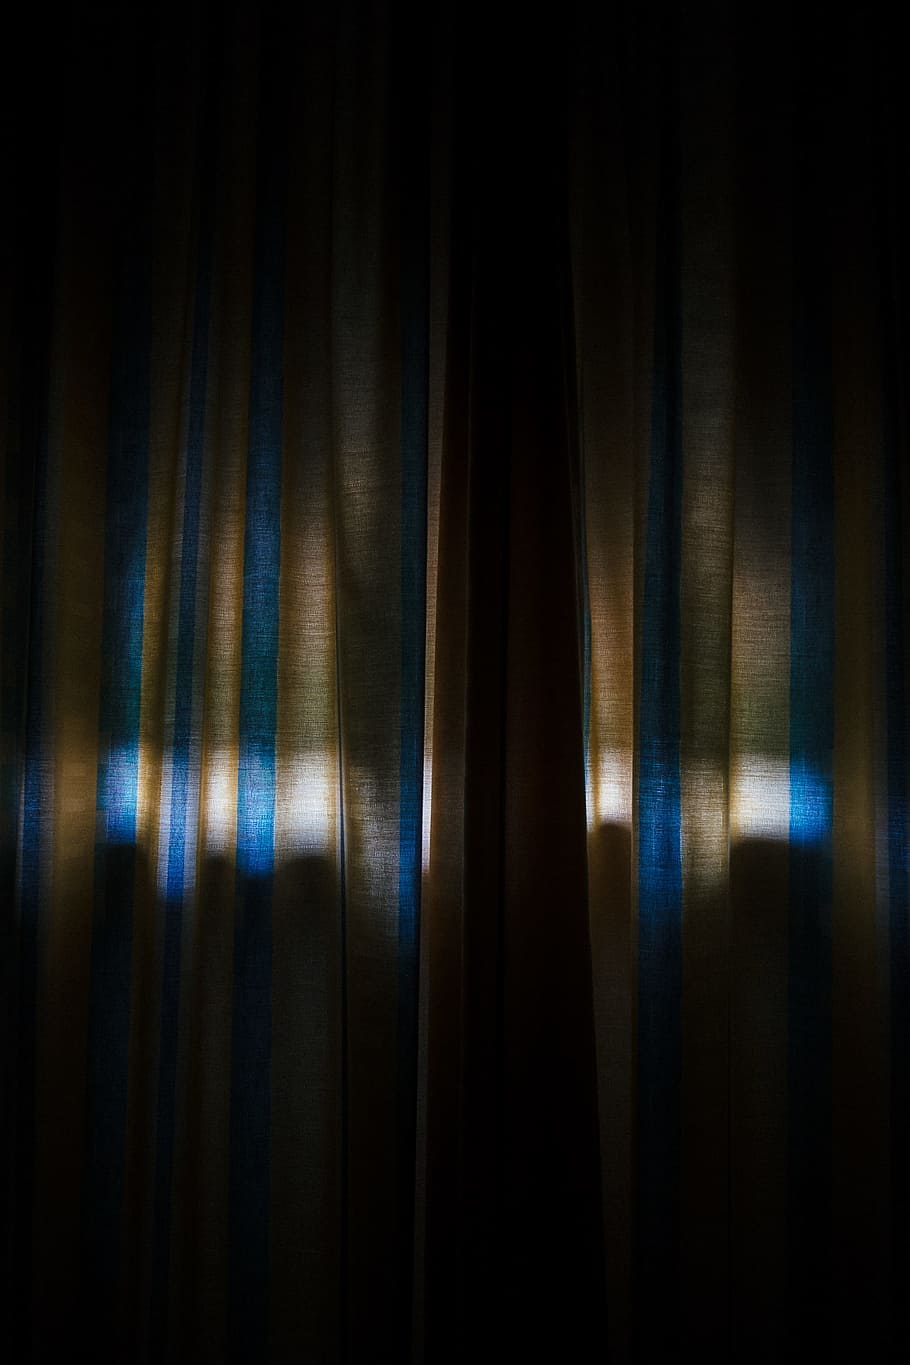 Hd Wallpaper Blue Grey And White Stripe Curtain In Dim Light Background Brown And Blue Striped Curtain Wallpaper Flare